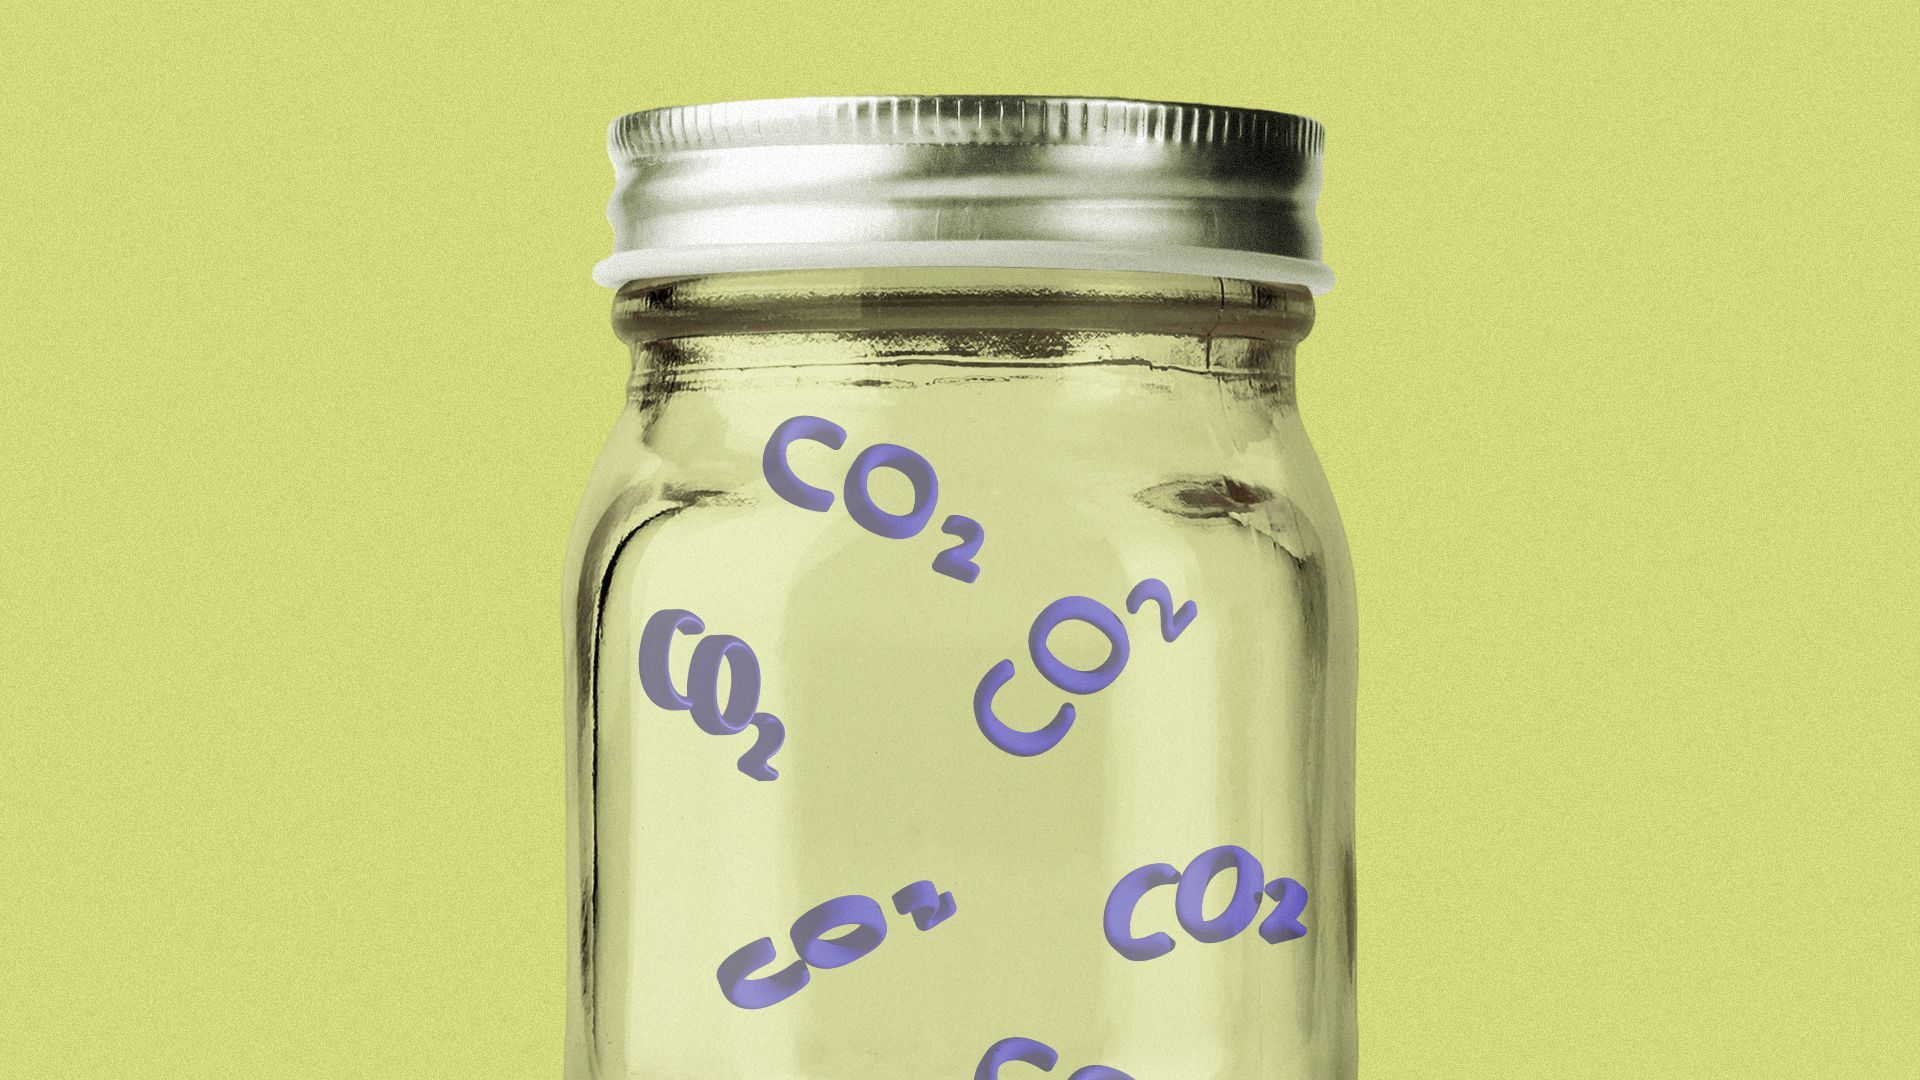 A jar with CO2 in it